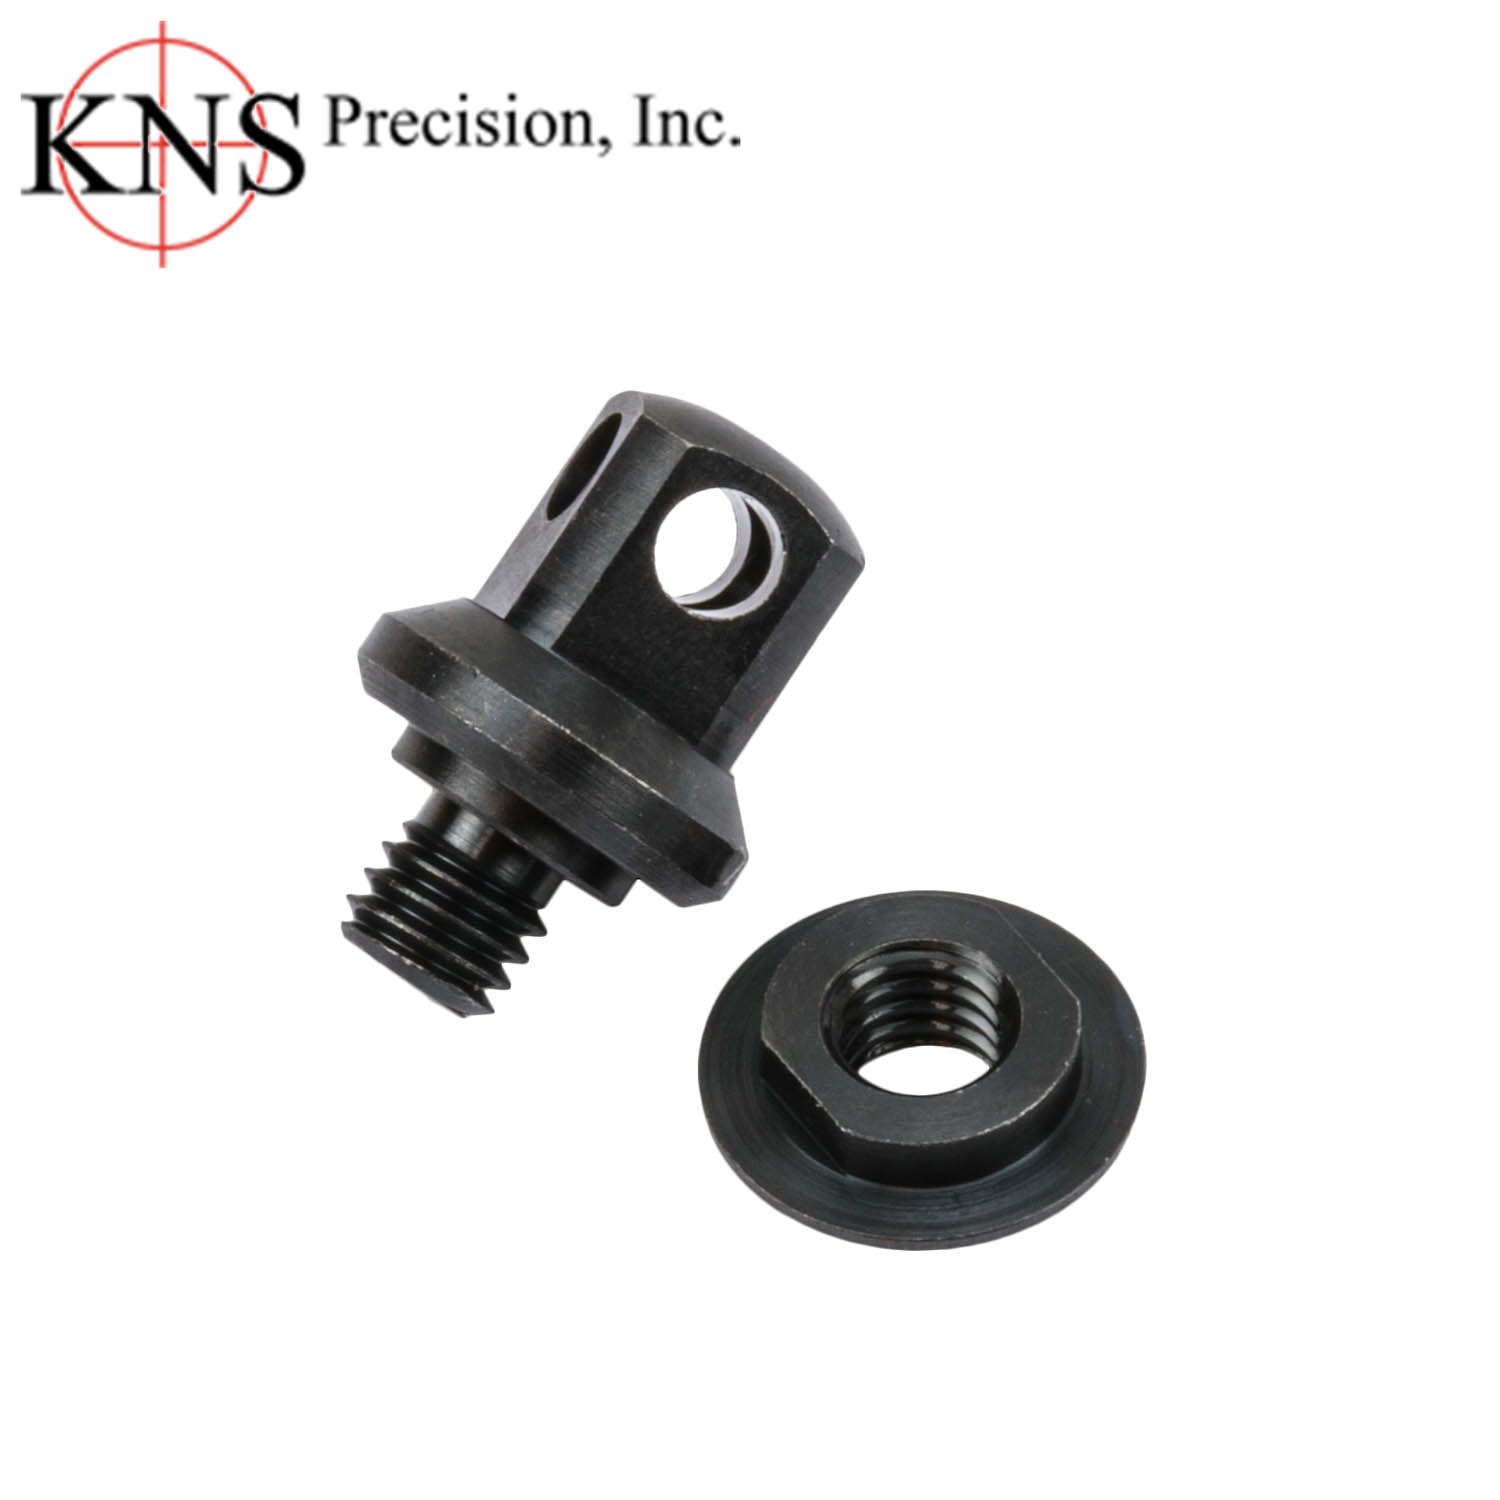 KNS Precision AR15 Front Sling Stud Mount, Black Oxide Finish: MGW